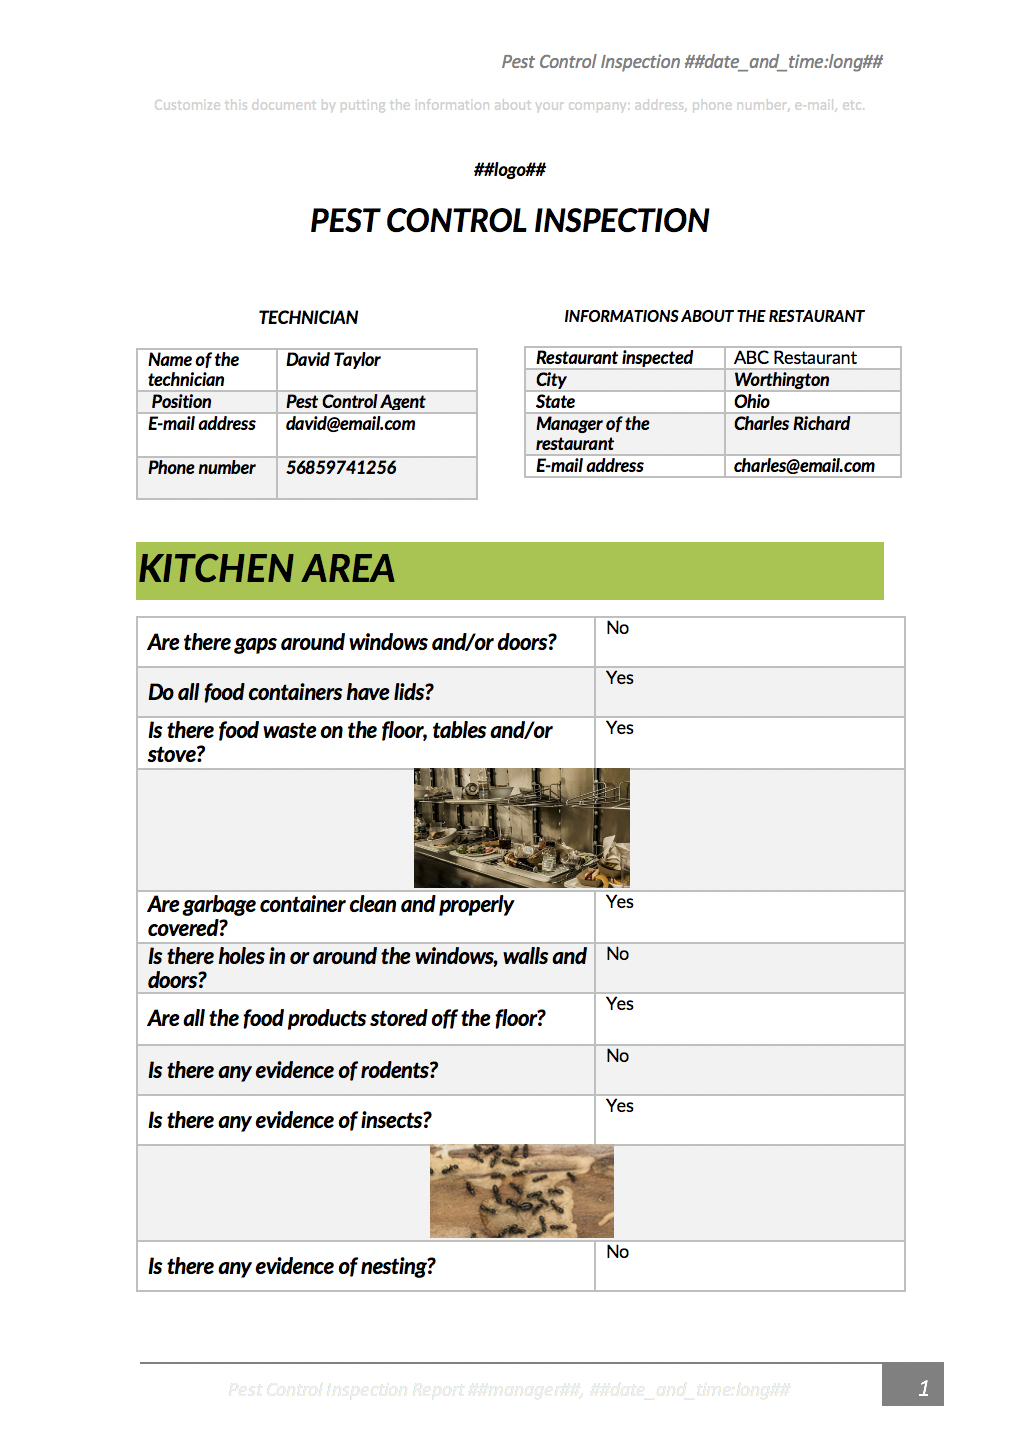 Pest Control Inspection With Kizeo Forms From Your Cellphone For Pest Control Inspection Report Template